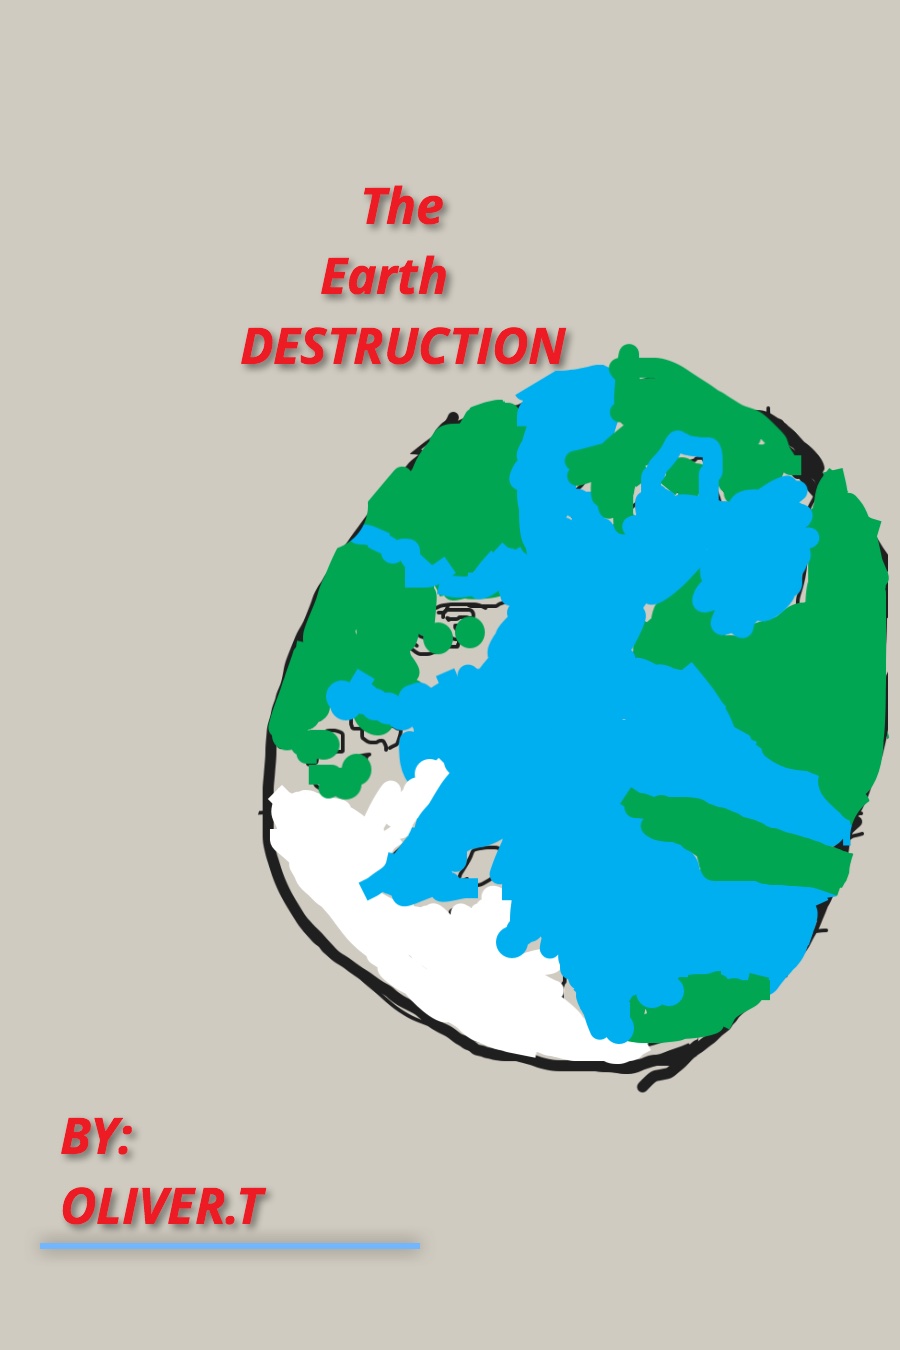 The Earth DESTRUCTION by Oliver T